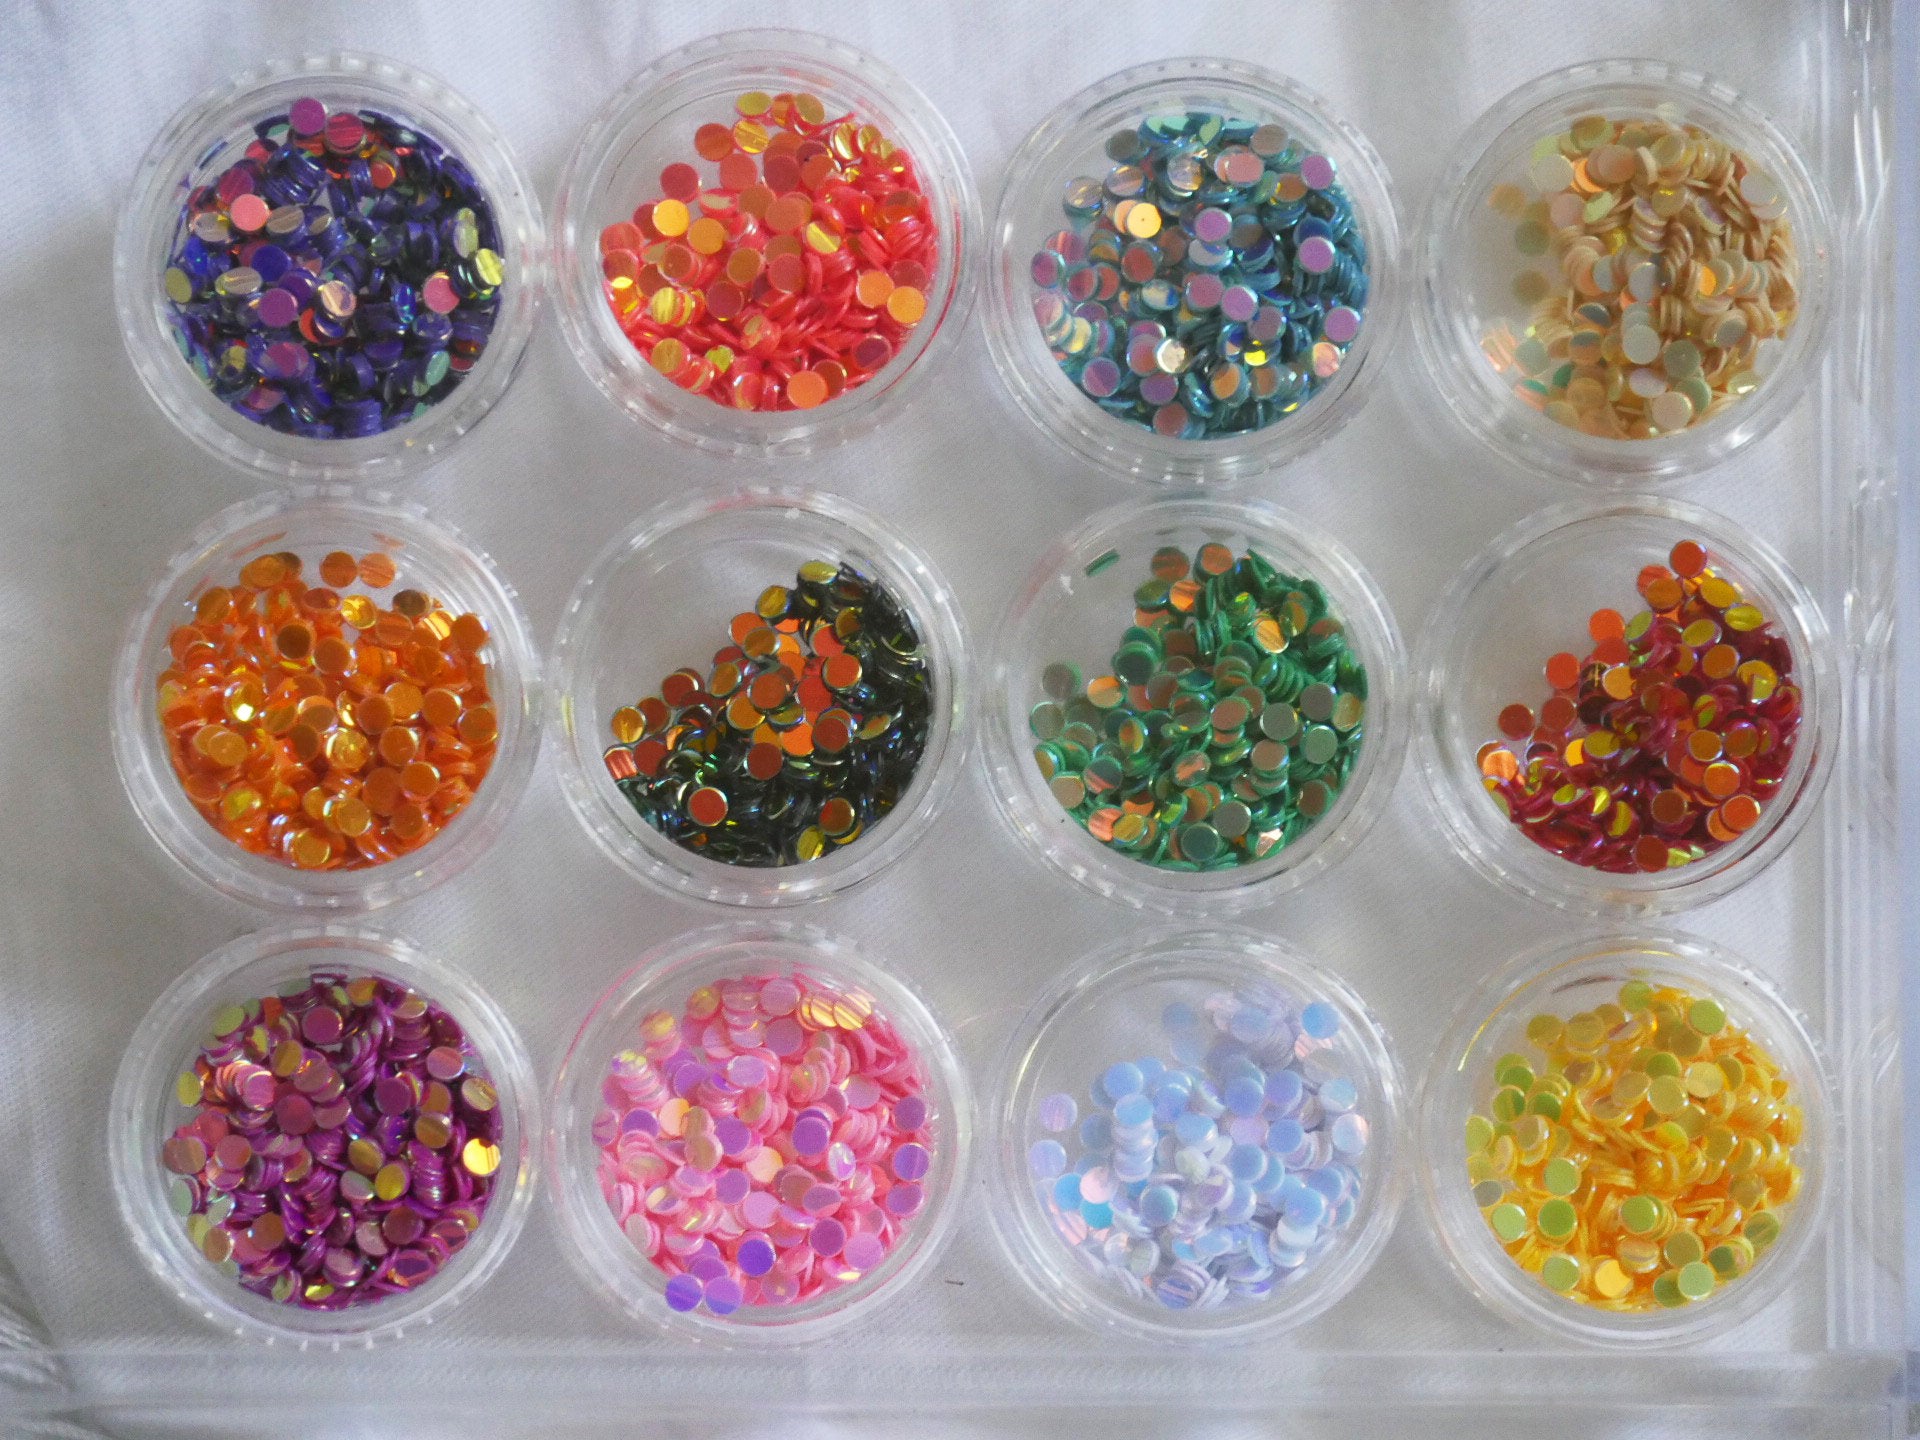 Confetti Mix Colors Chunky Glitter for Resin Crafts, Glitter for